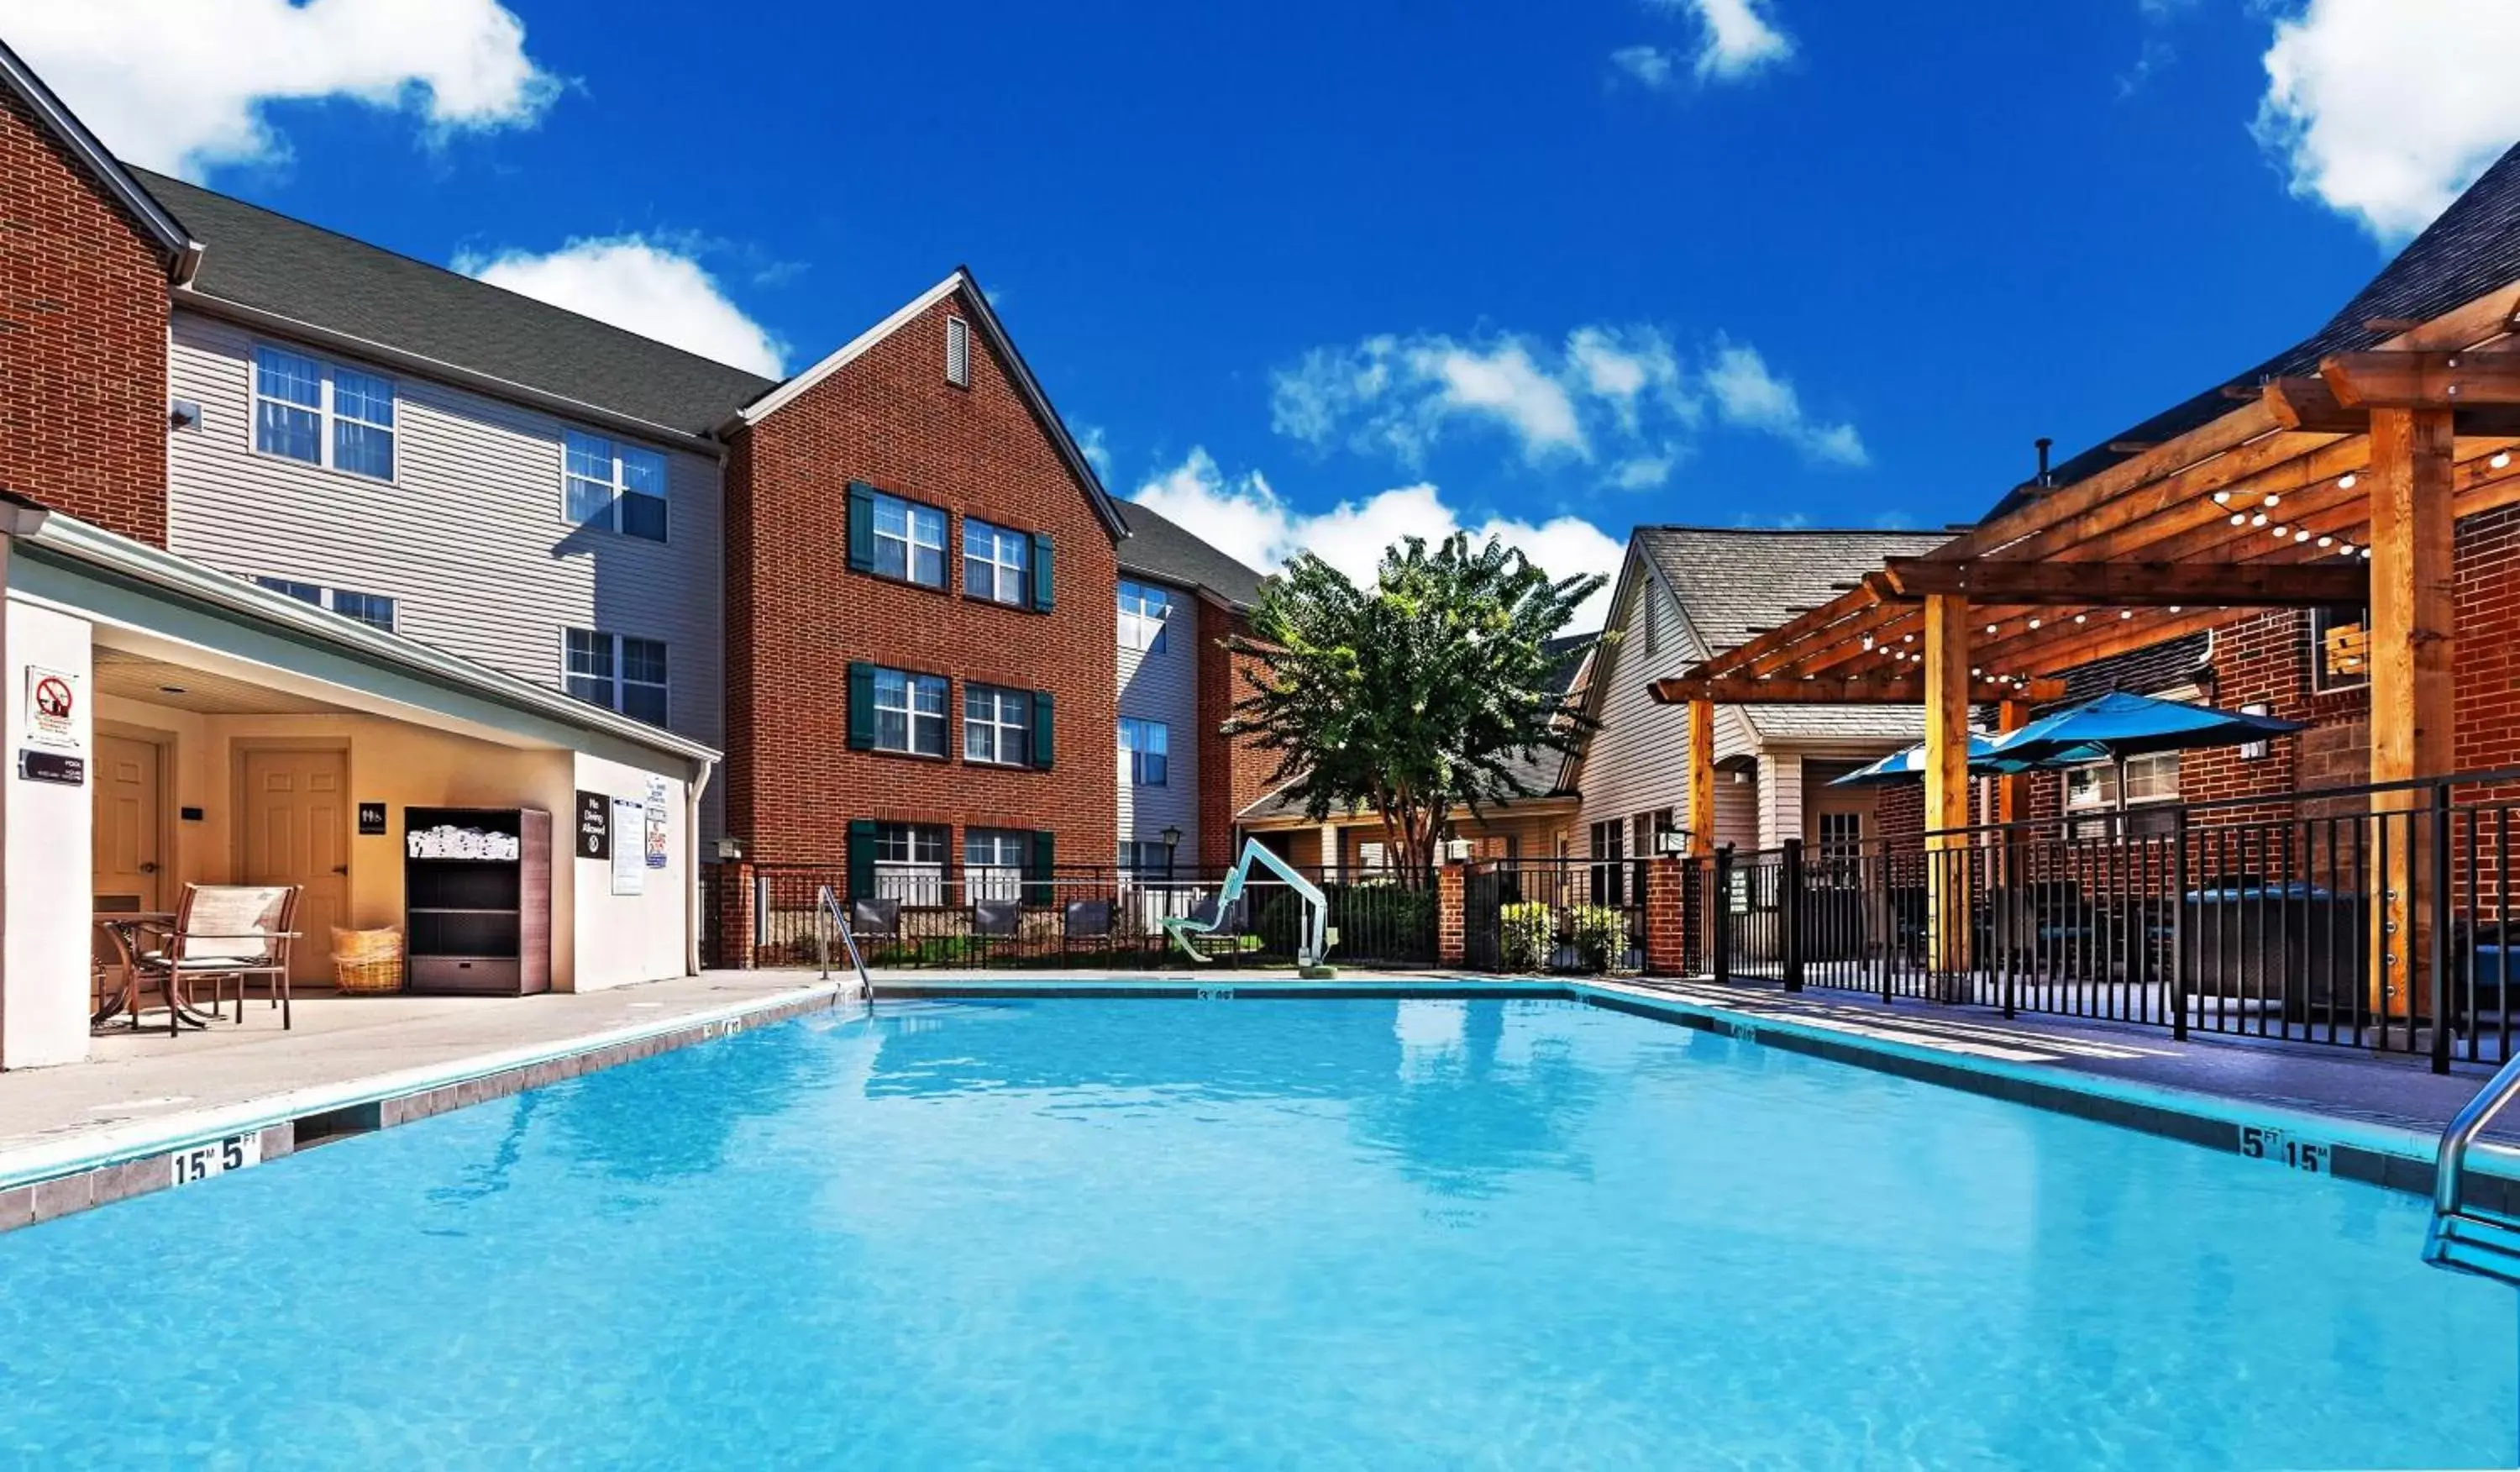 Pool view, Property Building in Homewood Suites by Hilton Greensboro